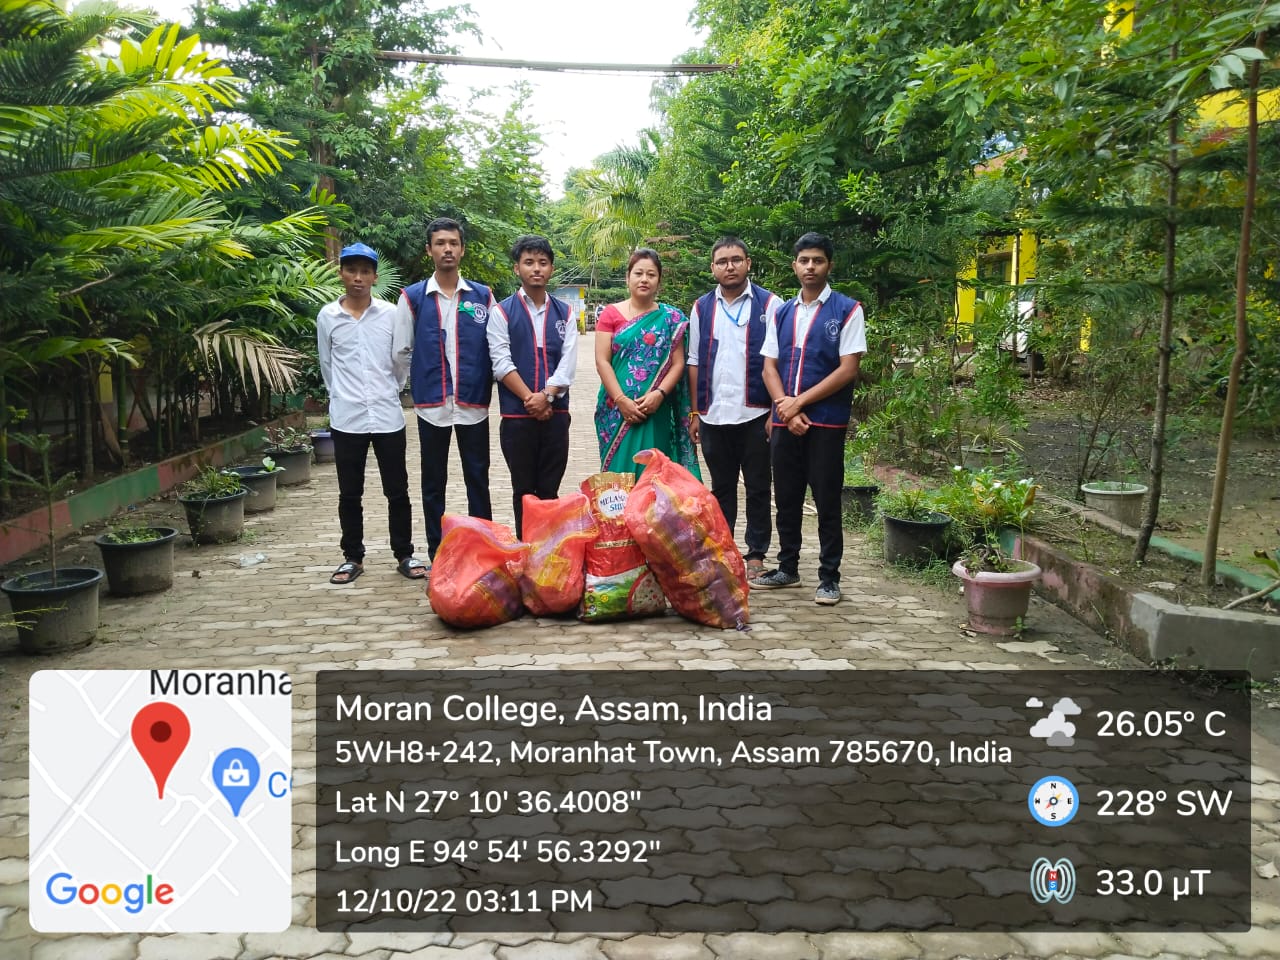 CLEAN INDIA CAMPAIGN IN THE MORAN COLLEGE PREMISES & SURROUNDING AREAS (DATE- 12/10/2022)